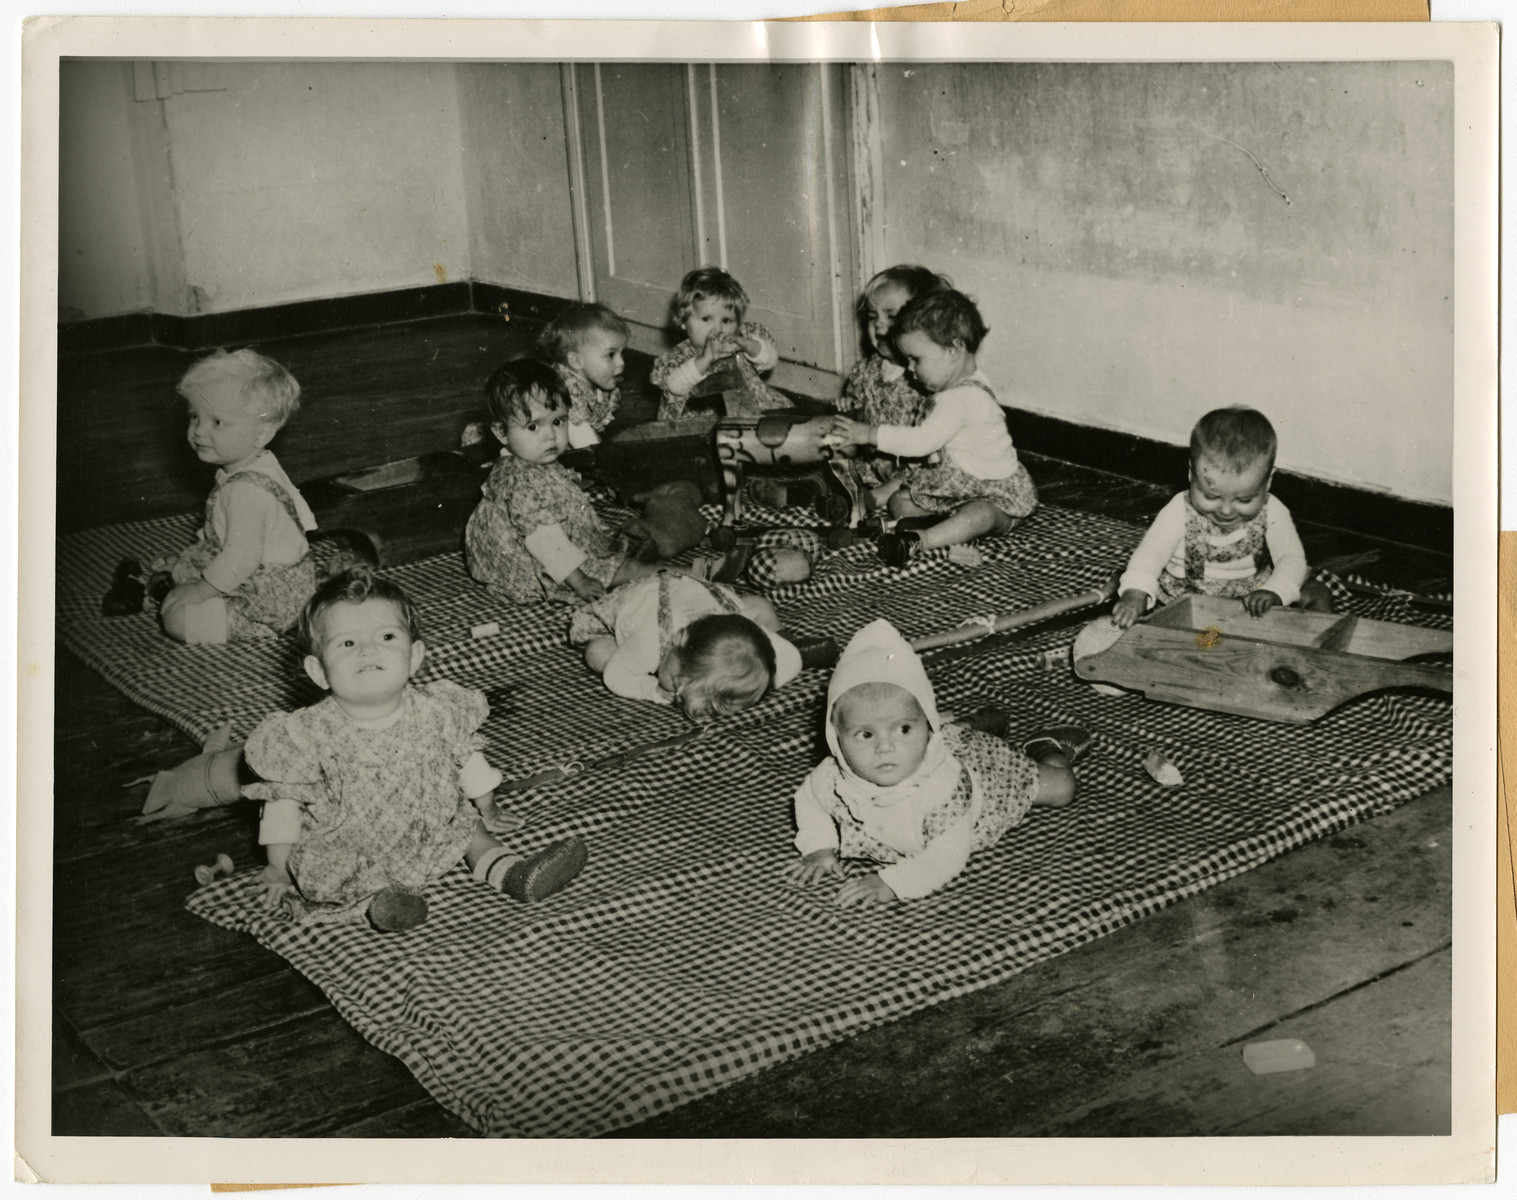 Orphans, found by U.S. troops in Germany, play in the infant/toddler room of Kloster Indersdorf.

The original caption reads: "Orphans of Indersdorf, Bavaria
Orphans of 12 nations have found a new home in a former nunnery at Indersdorf, Bavaria, where UNRRA (United Nations Relief and Rehabilitation Administration) recently opened an international refuge for children found by the U.S. Army in Germany. Hundreds of helpless children whose parents were killed or lost during the war were sent from Nazi foreign labor and concentration camps to this institution. Two- thirds of the group are Polish and Jewish. Some are too young to remember their parents and others do not know their own names. Most of these from the concentration camps have no other identification than a number and the letters "KL" (Konzentrations Lager) marked on their skins. When children arrive at the institution, they are deloused, bathed and given clean clothes. Medical attendants then innoculate them against typhoid fever, diptheria, and smallpox. The infants are cared for by nurses while older children begin elementary education in their own language under teachers of the Allied nations. 

This photo shows: Orphan children, found by the U.S. troops advancing into Germany during the war, frolic happily in the playroom of the institution."